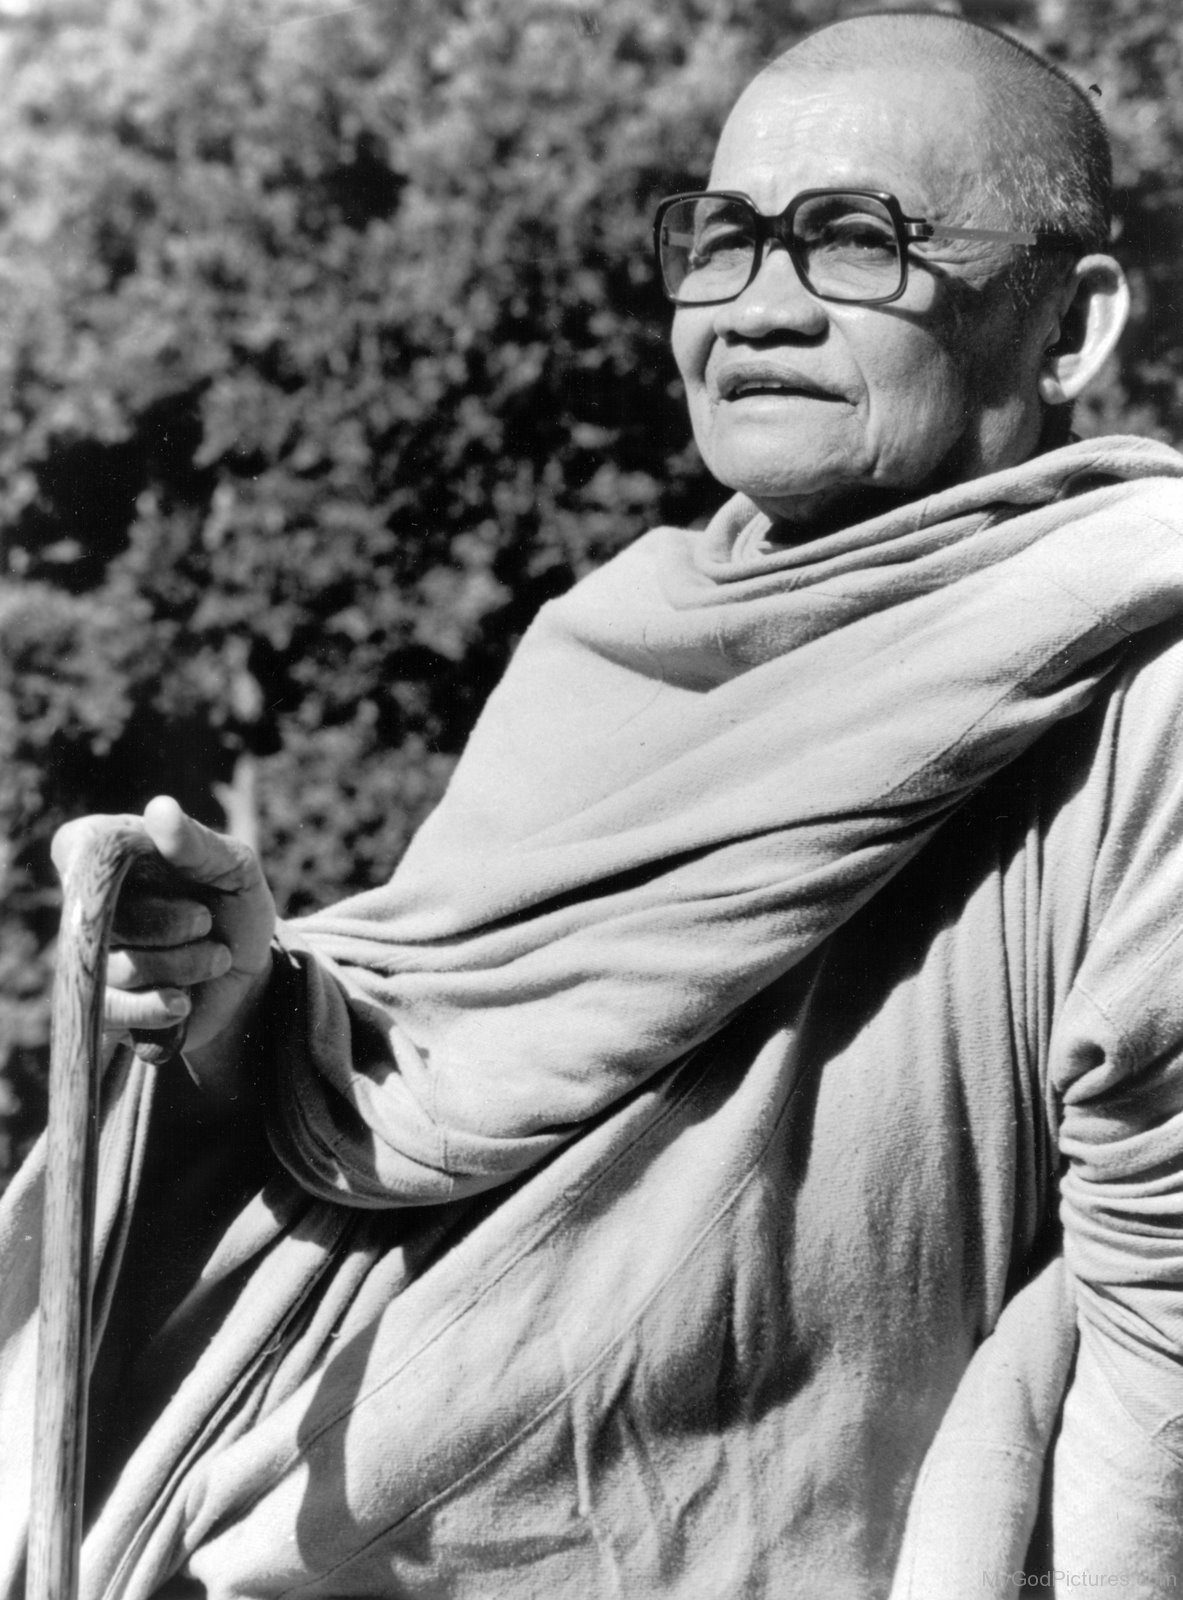 Image result for ajahn chah